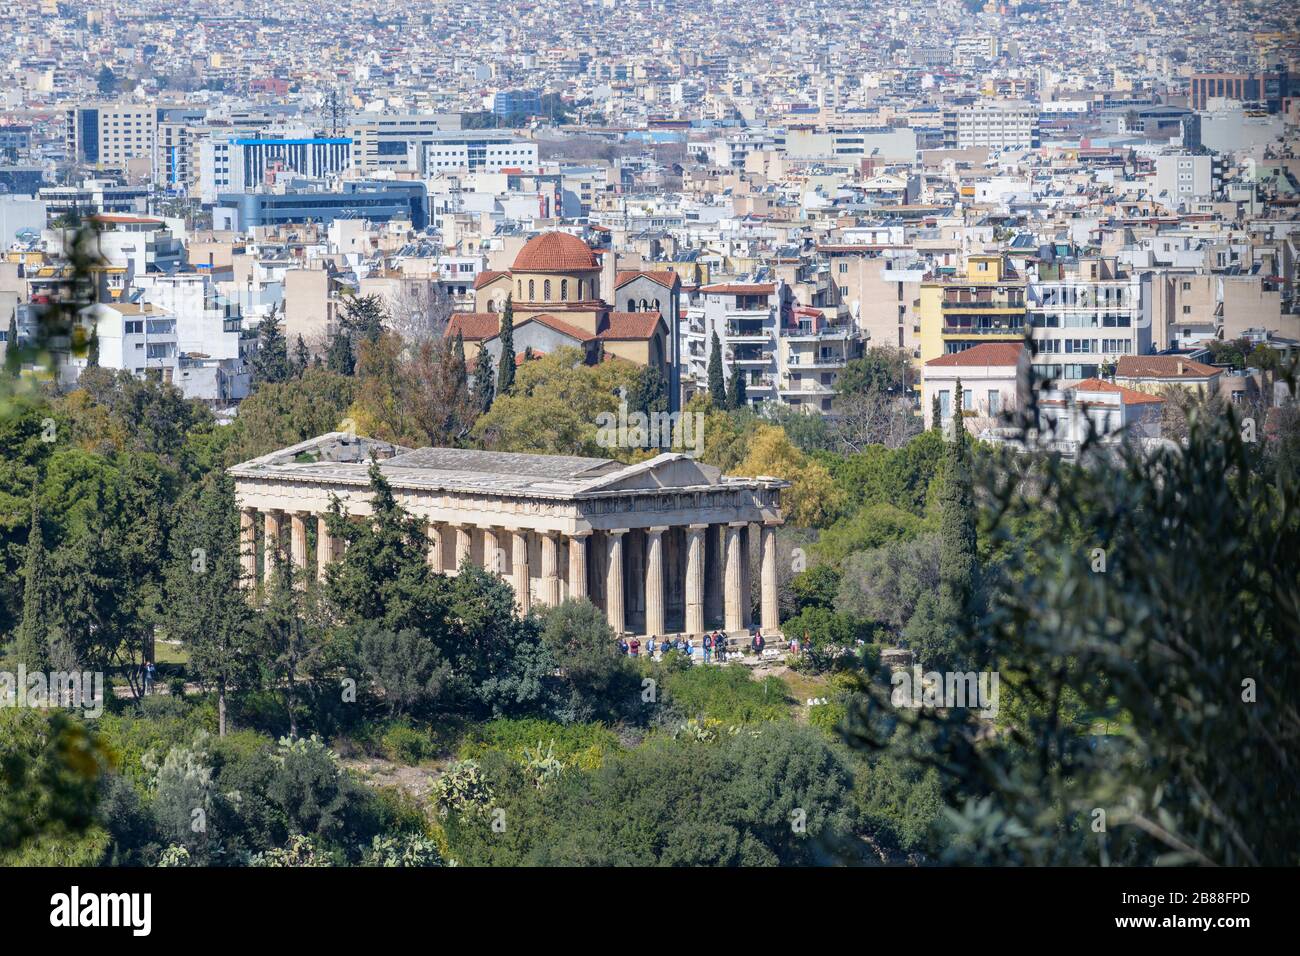 Temple of Hephaestus seen from distance in ancient Agora, Athens Stock Photo